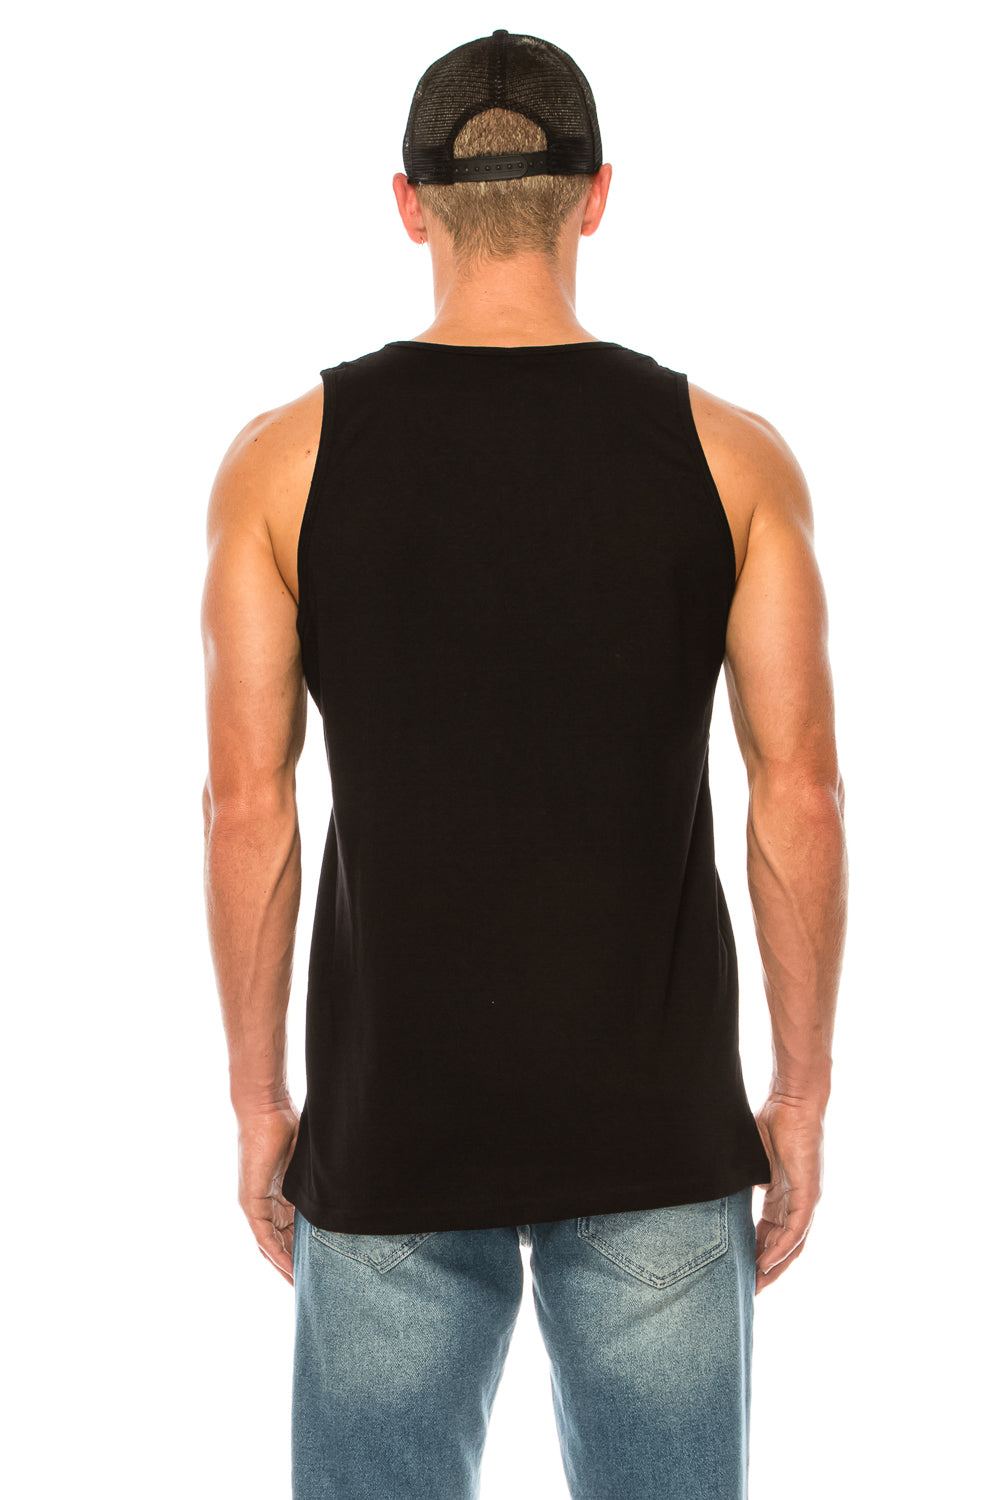 IF YOU DON'T LOVE IT LEAVE IT MEN'S TANK TOP - Trailsclothing.com